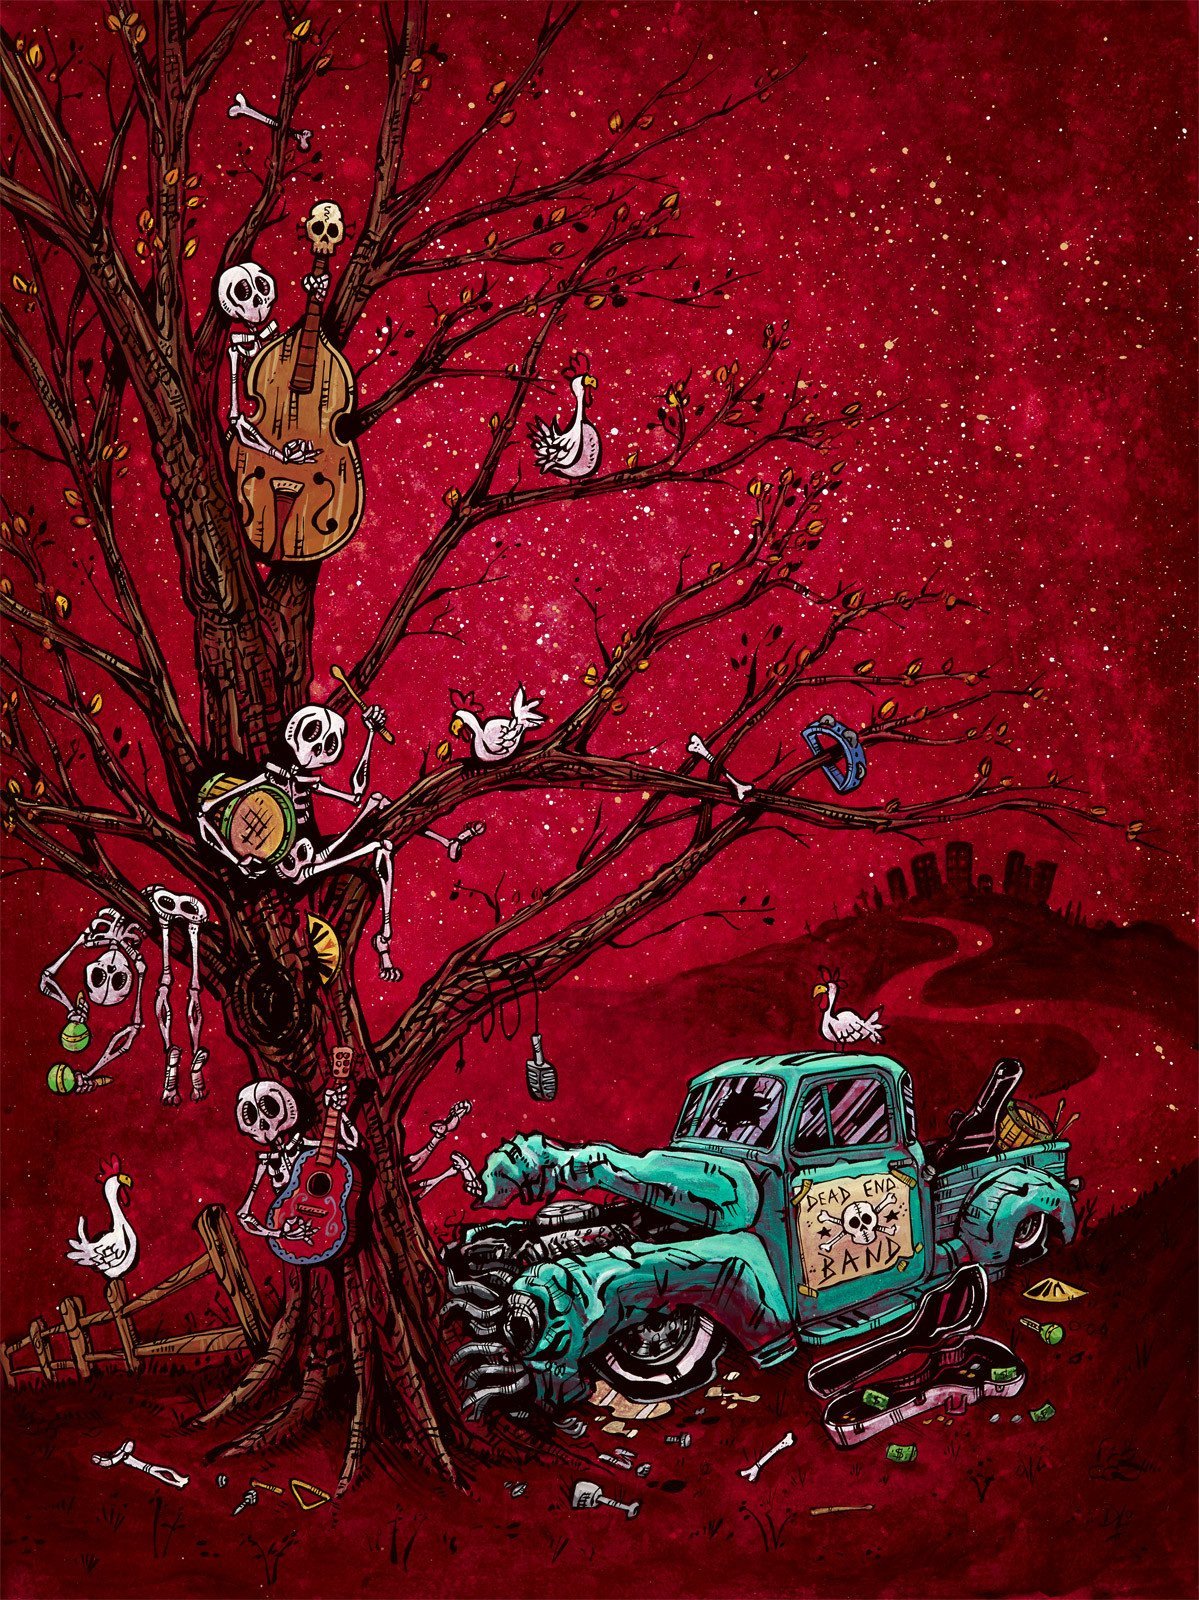 The Dead End Band by Day of the Dead Artist David Lozeau, Day of the Dead Art, Dia de los Muertos Art, Dia de los Muertos Artist